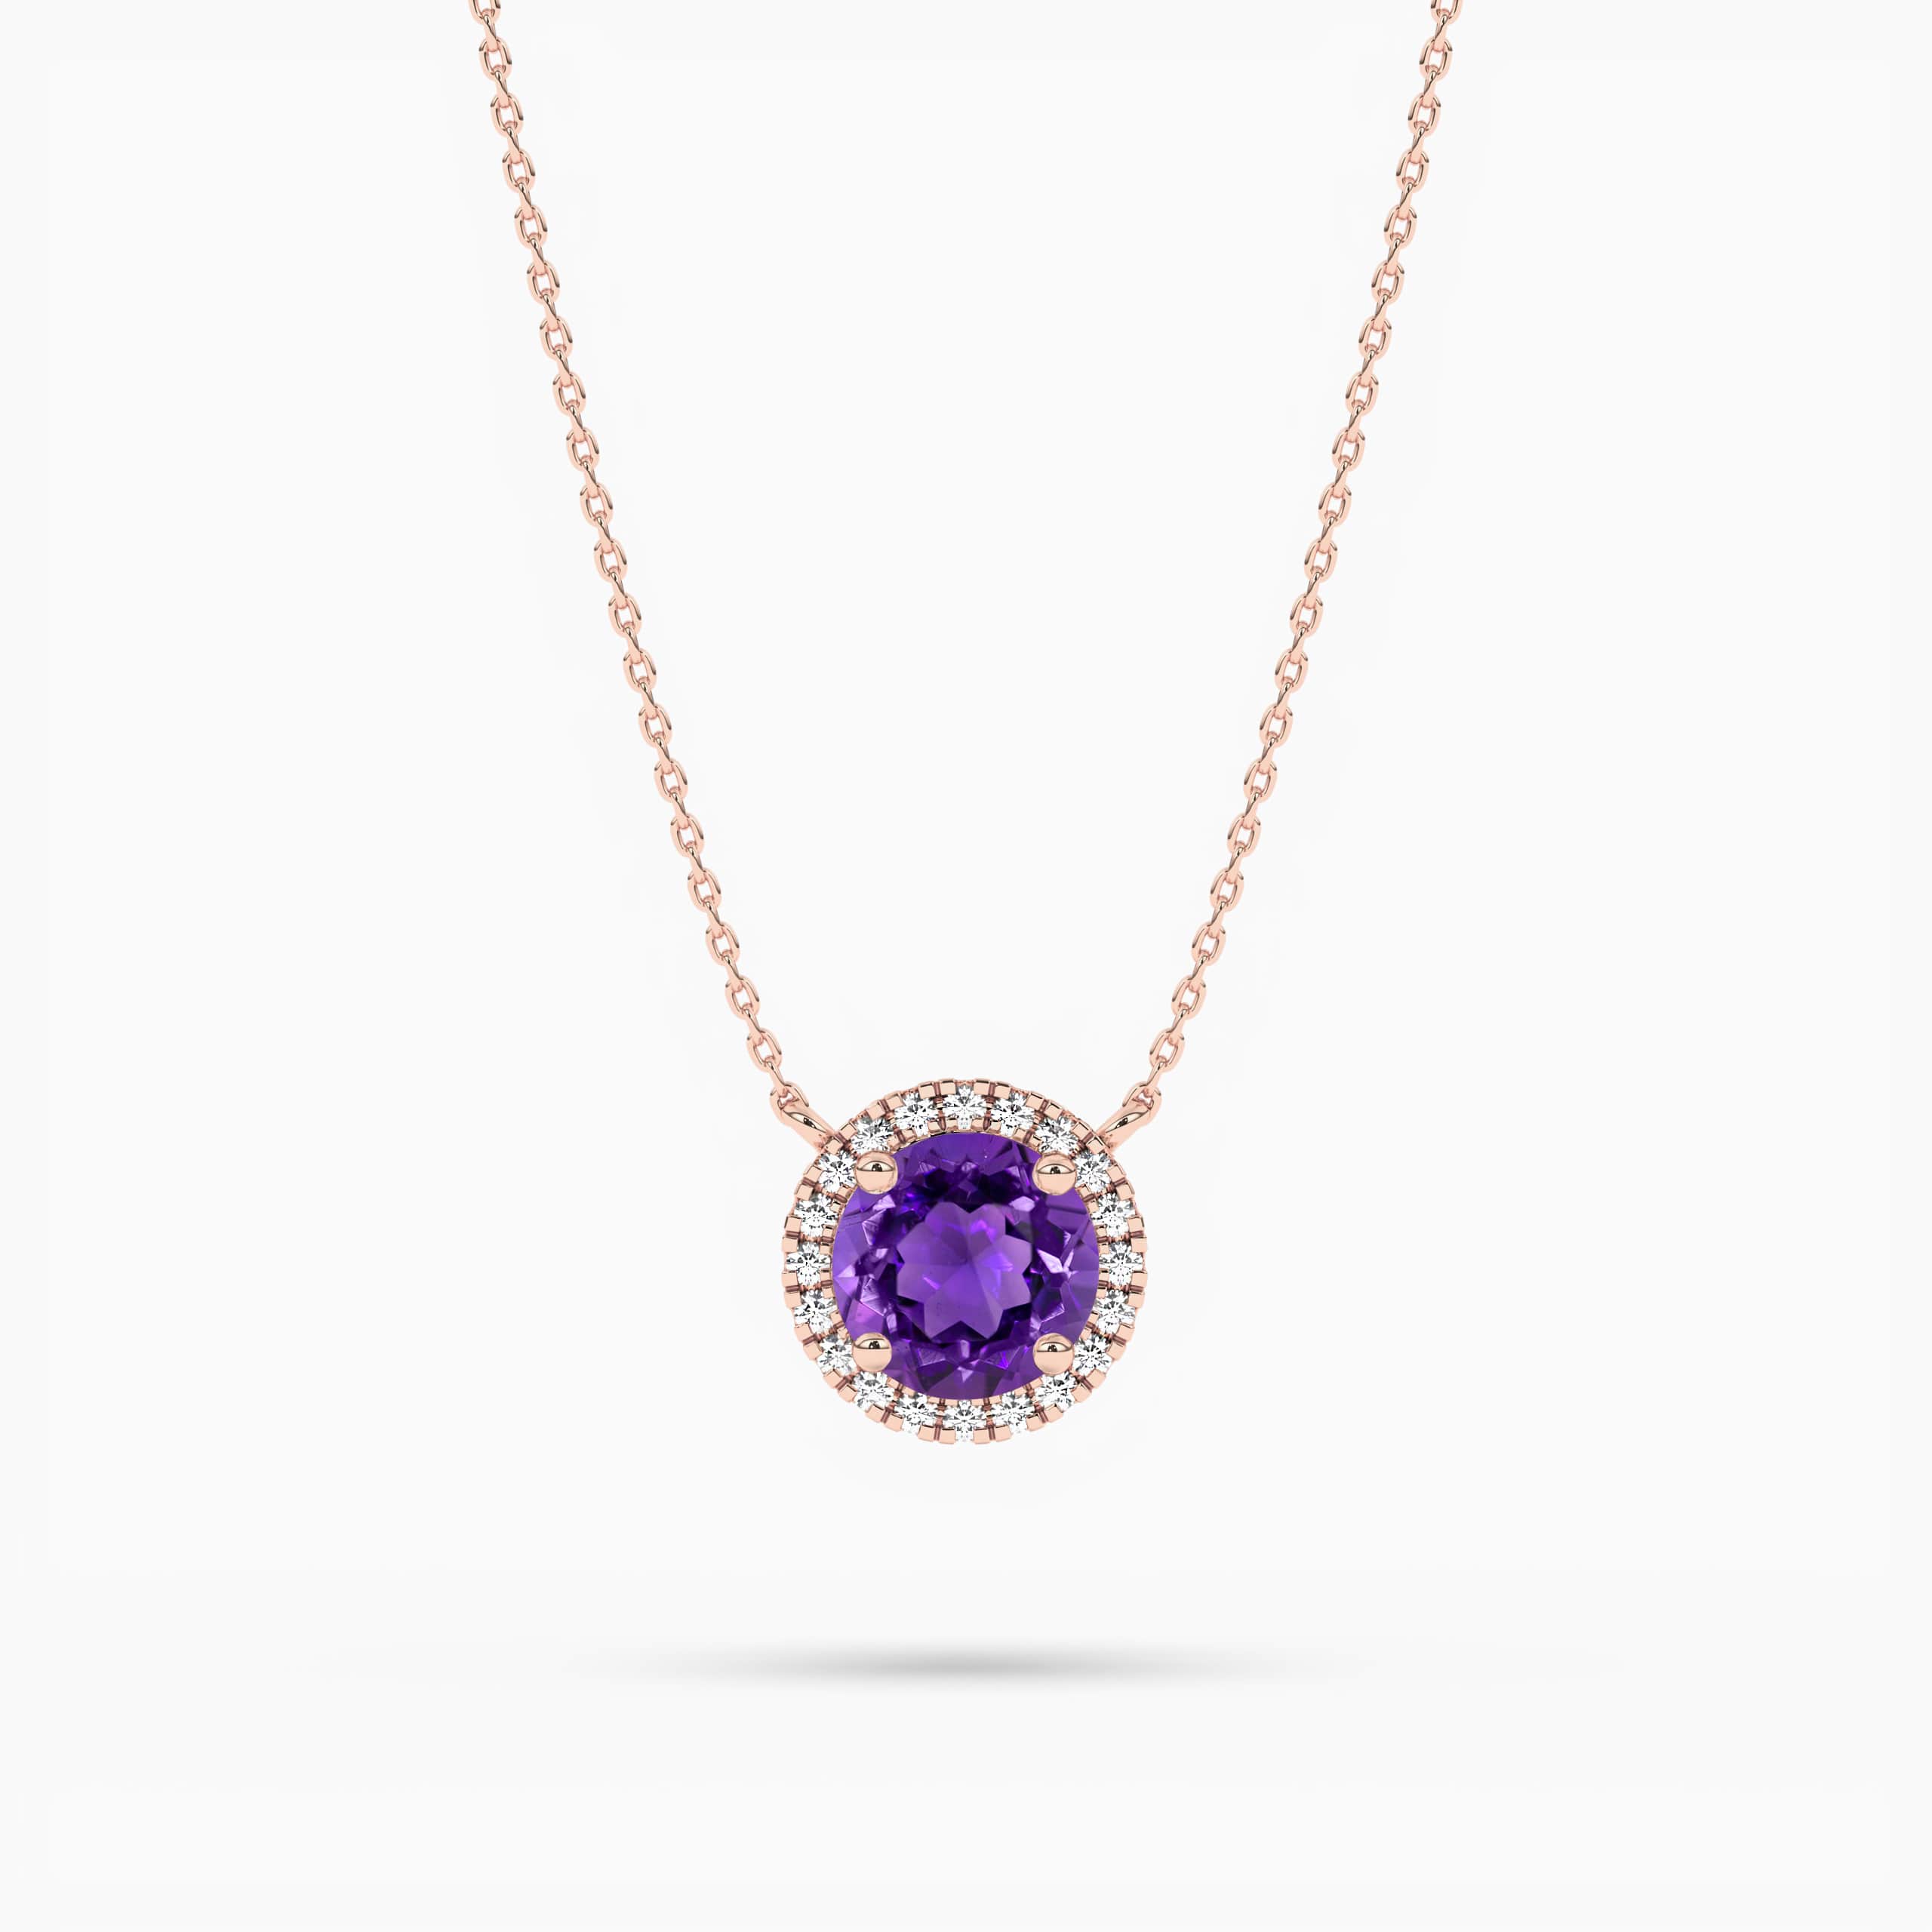 ROSE GOLD ROUND AMETHYST PENDANT WITH DIAMOND HALO ON ROSE GOLD CHAIN